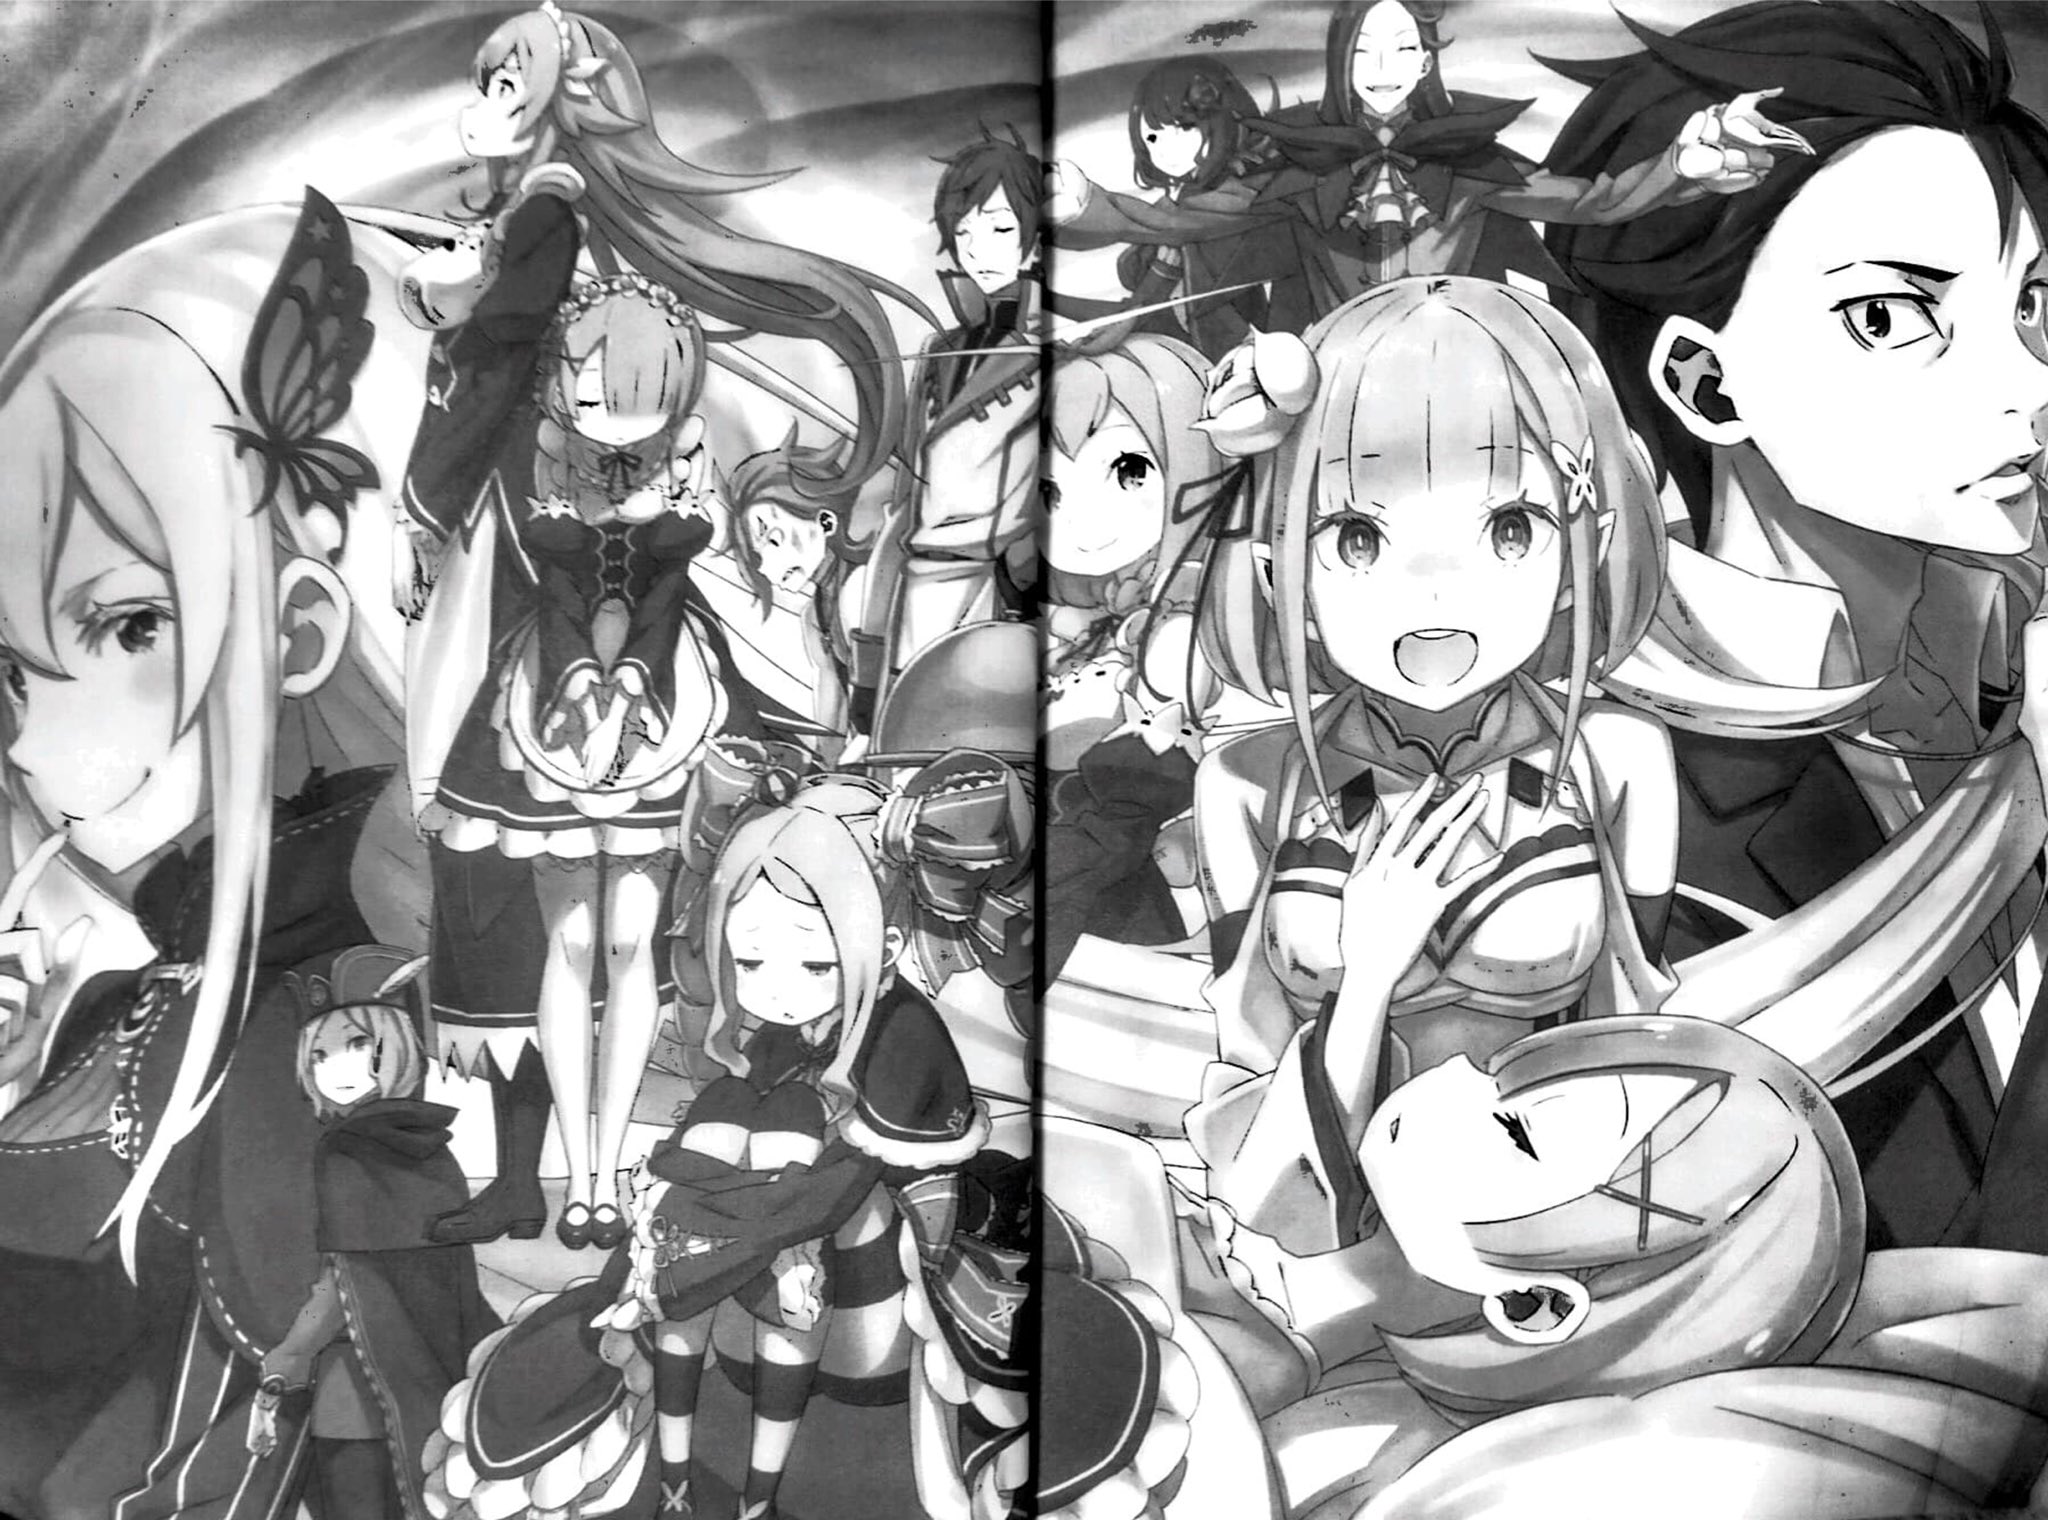 Discussion] Someone know the reading order of re zero if stories I